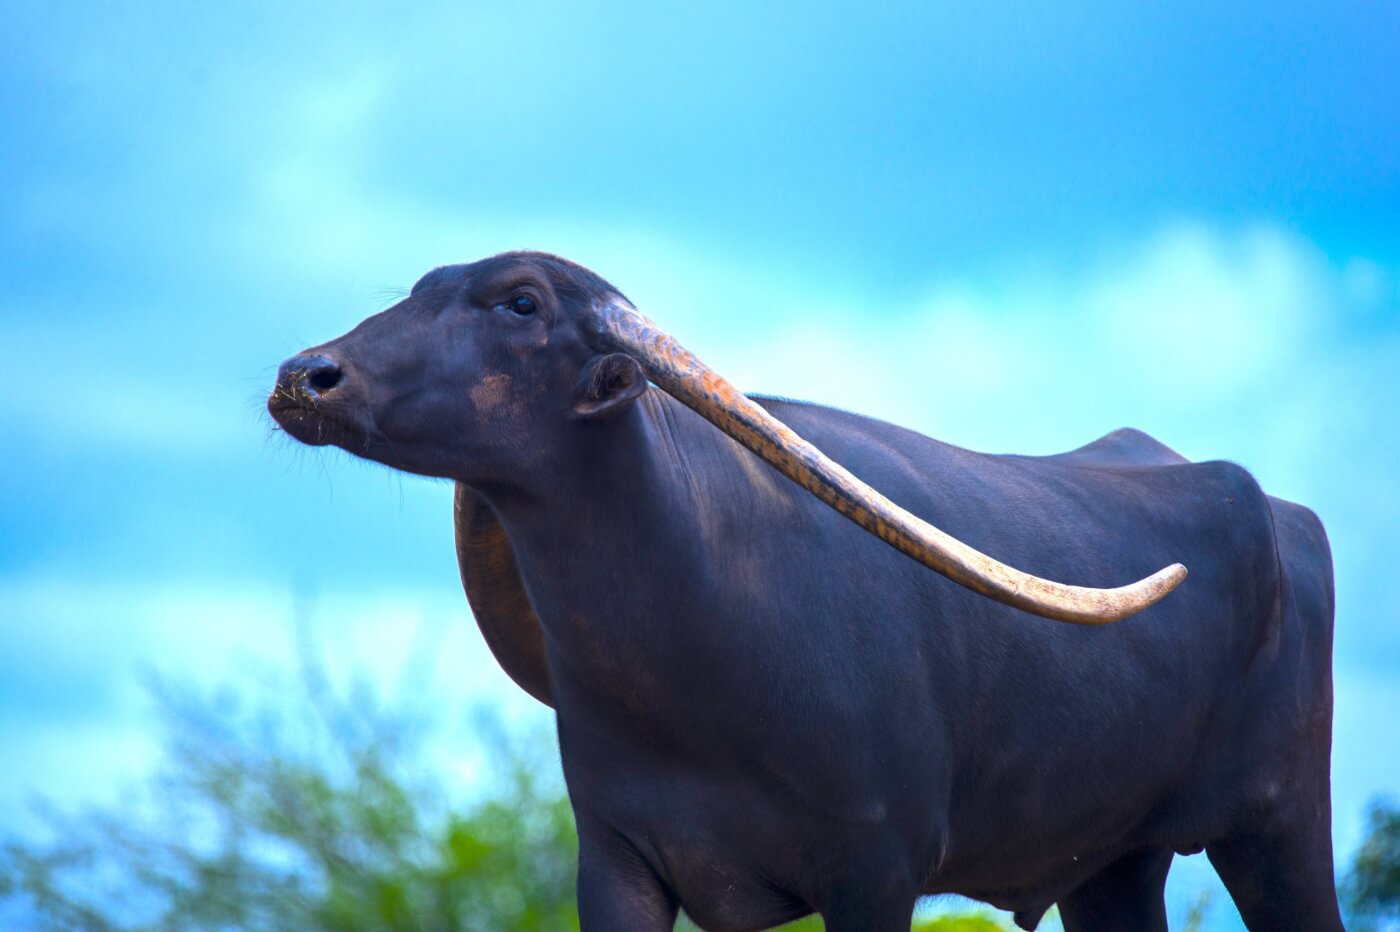 A water buffalo in front of a bright blue sky